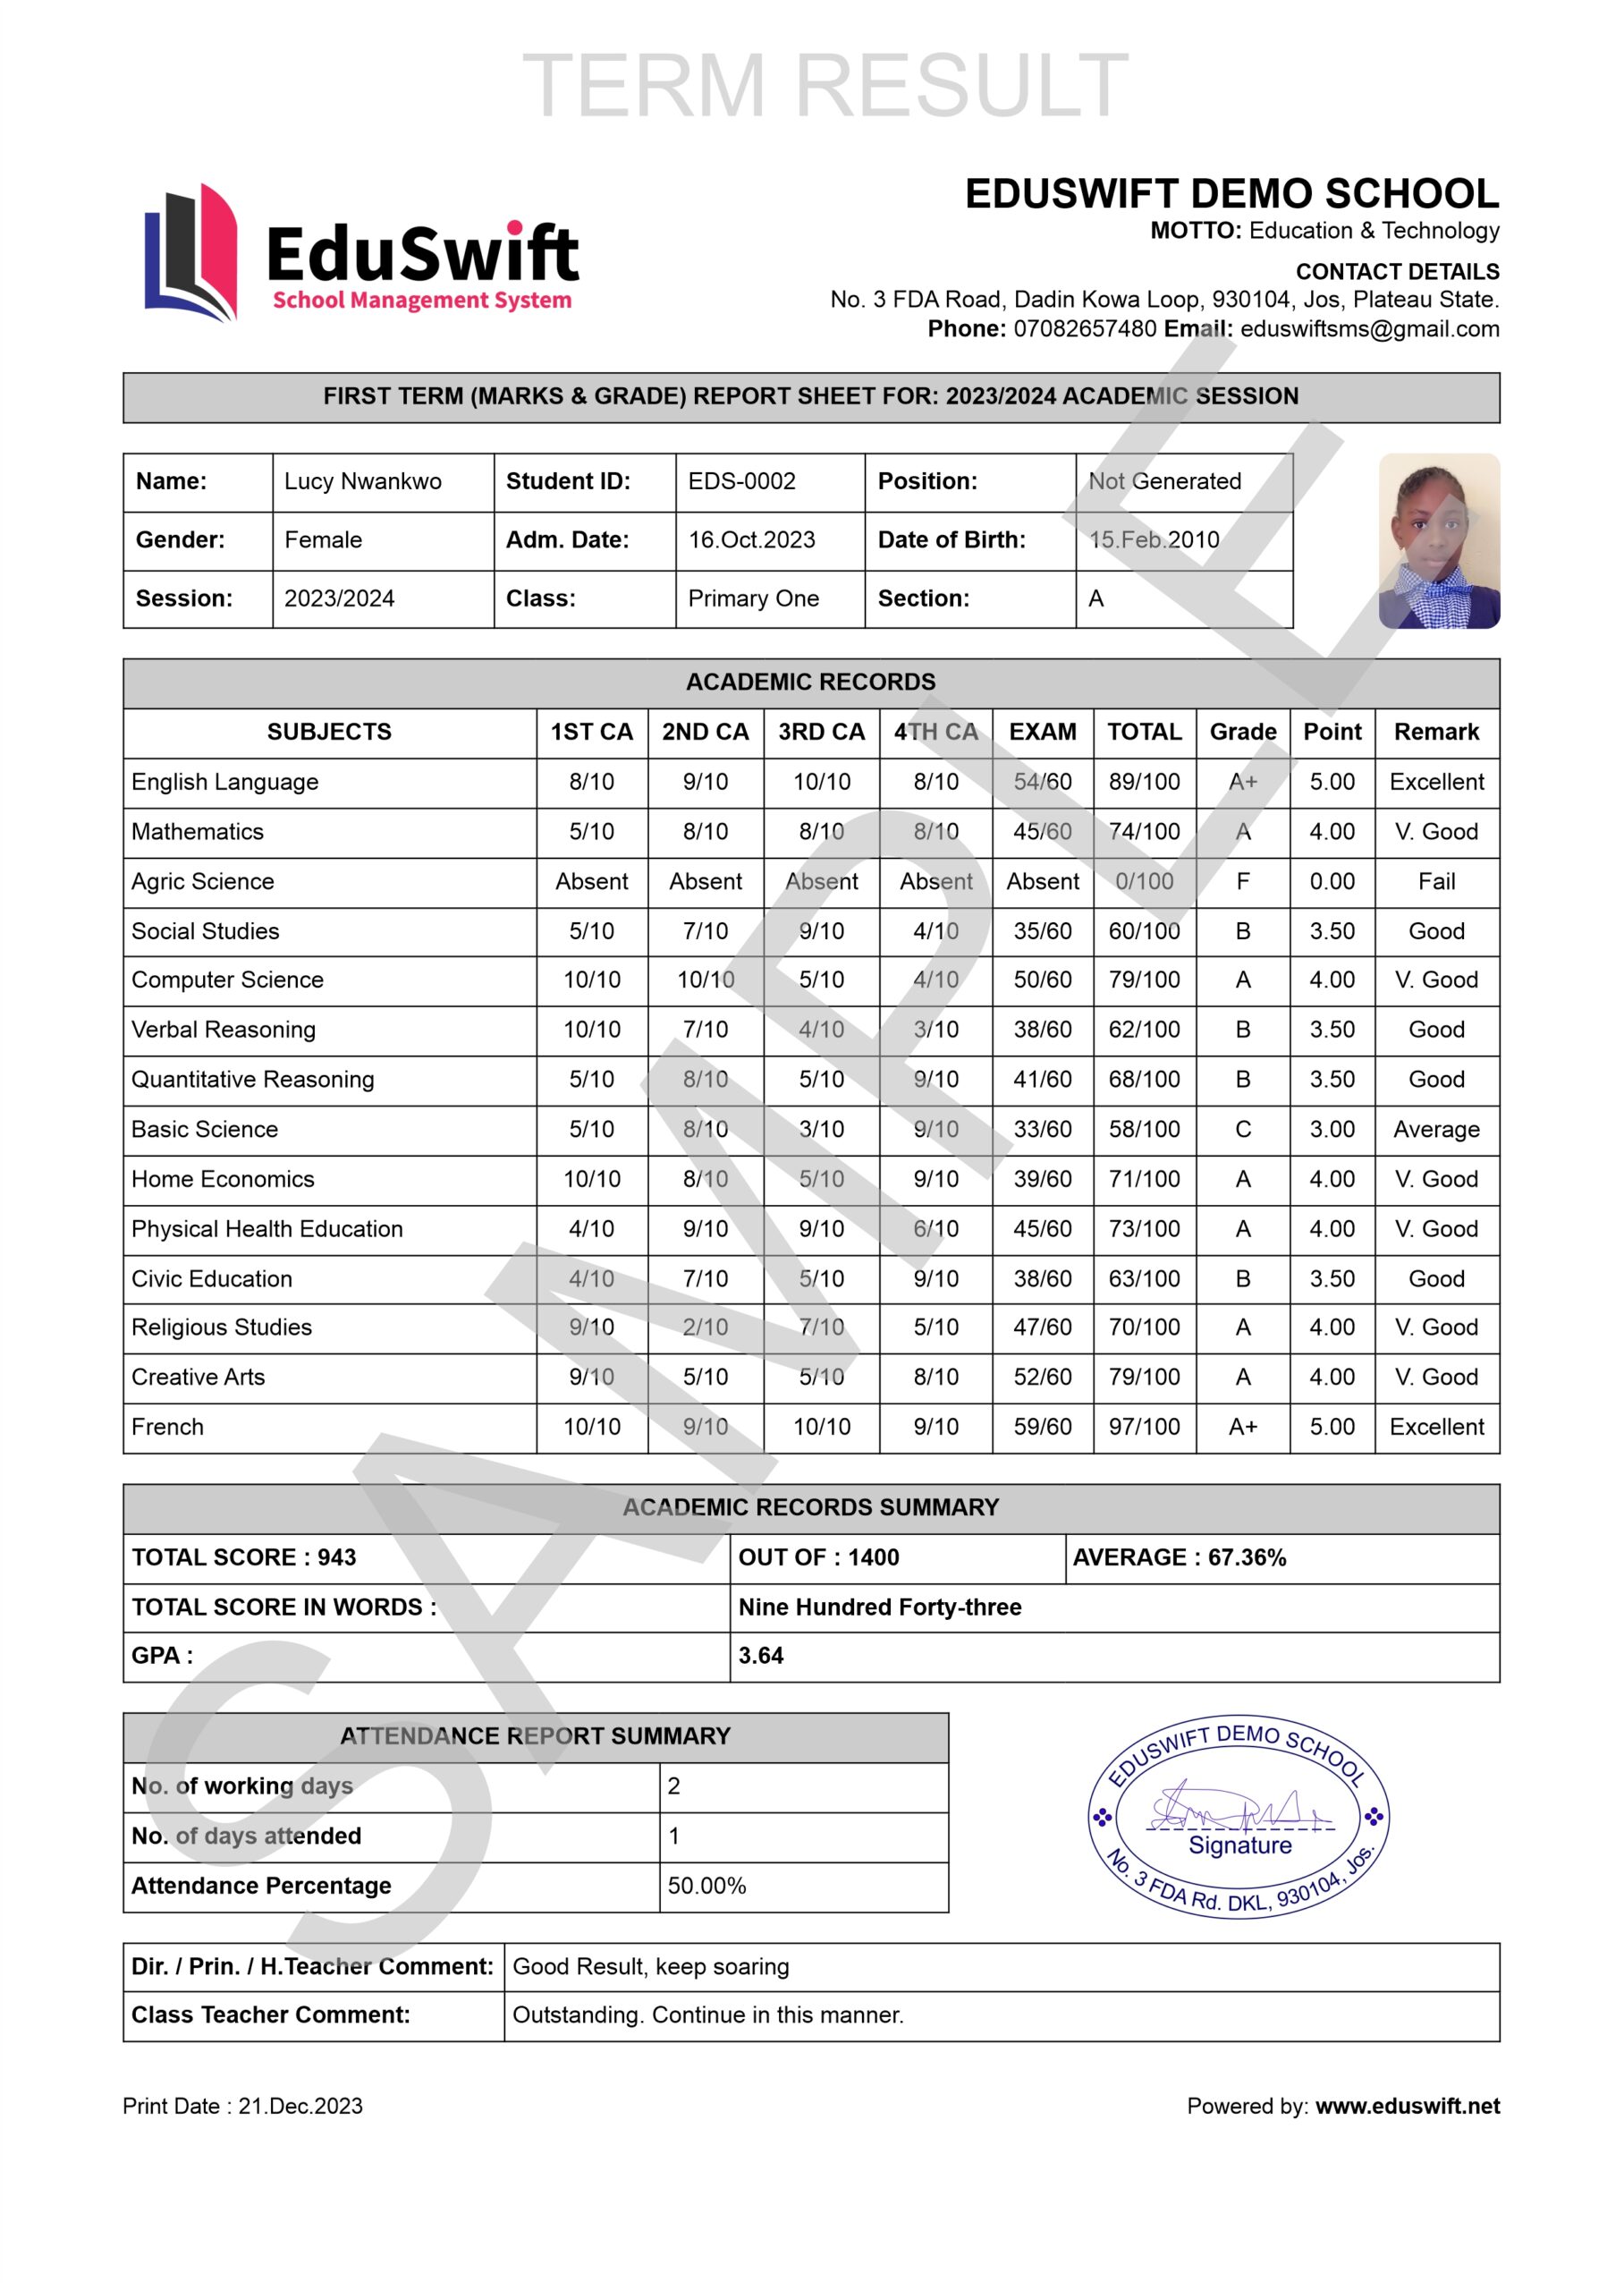 Report Card - EDS-0002 Edited